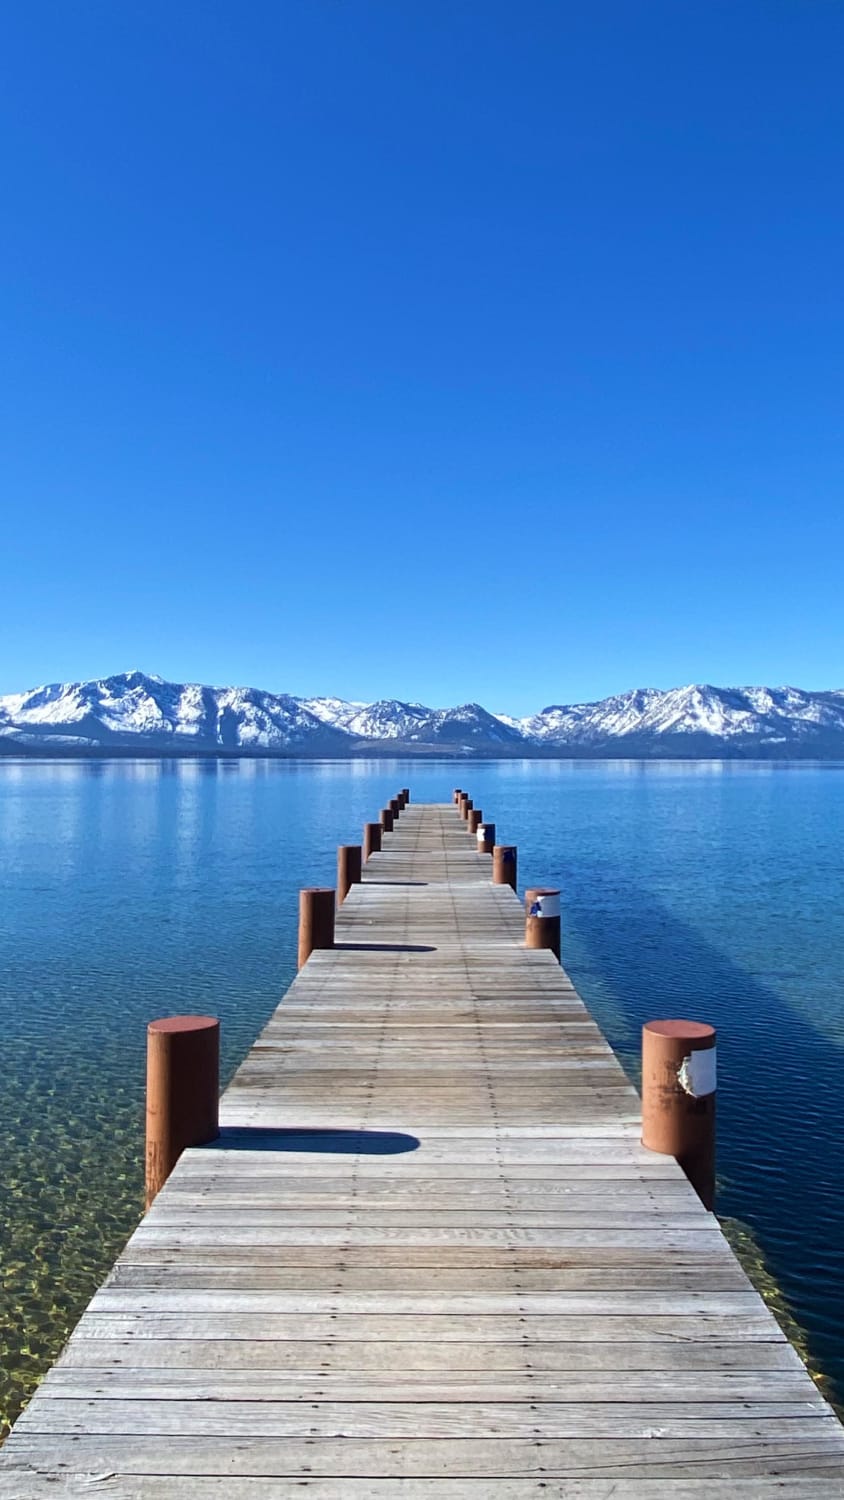 ITAP of a private dock in Lake Tahoe, Nevada